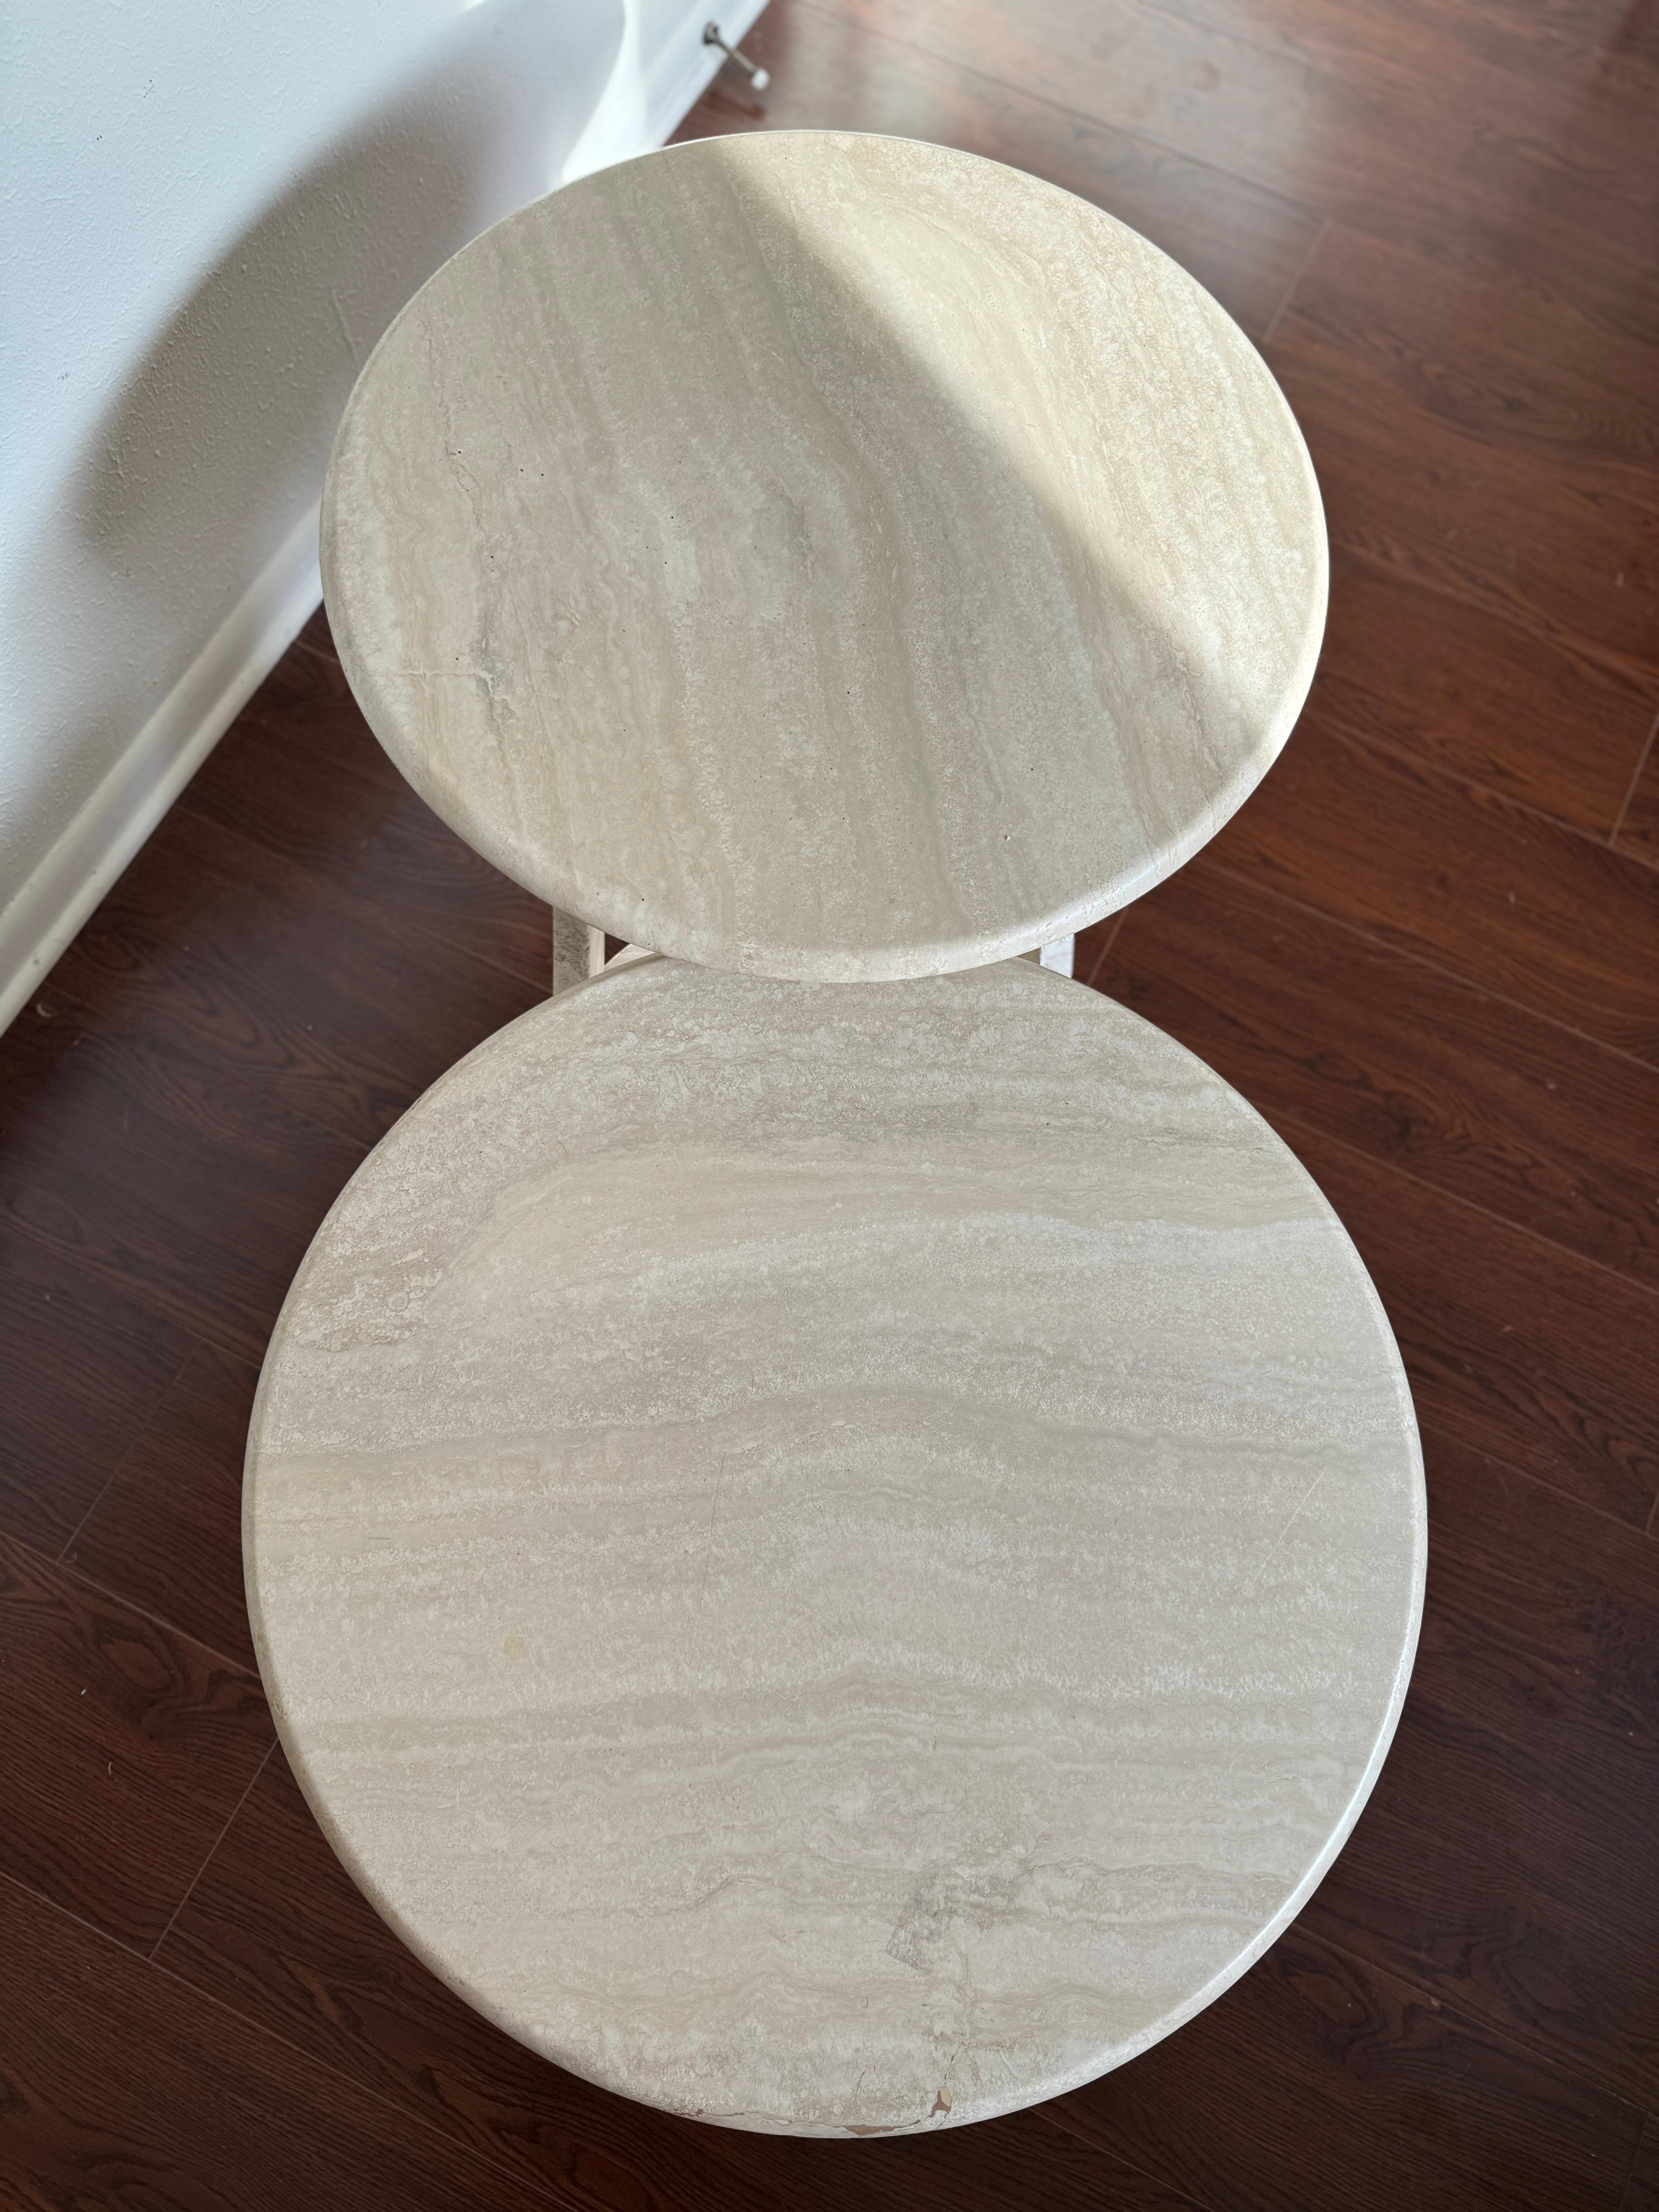 Rare Italian two tier travertine coffee table, circa 1970s. Two round travertine plates sit on an elegant travertine base. Overall in very good condition, and structurally sound. 

17” H x 50” W x 26” D